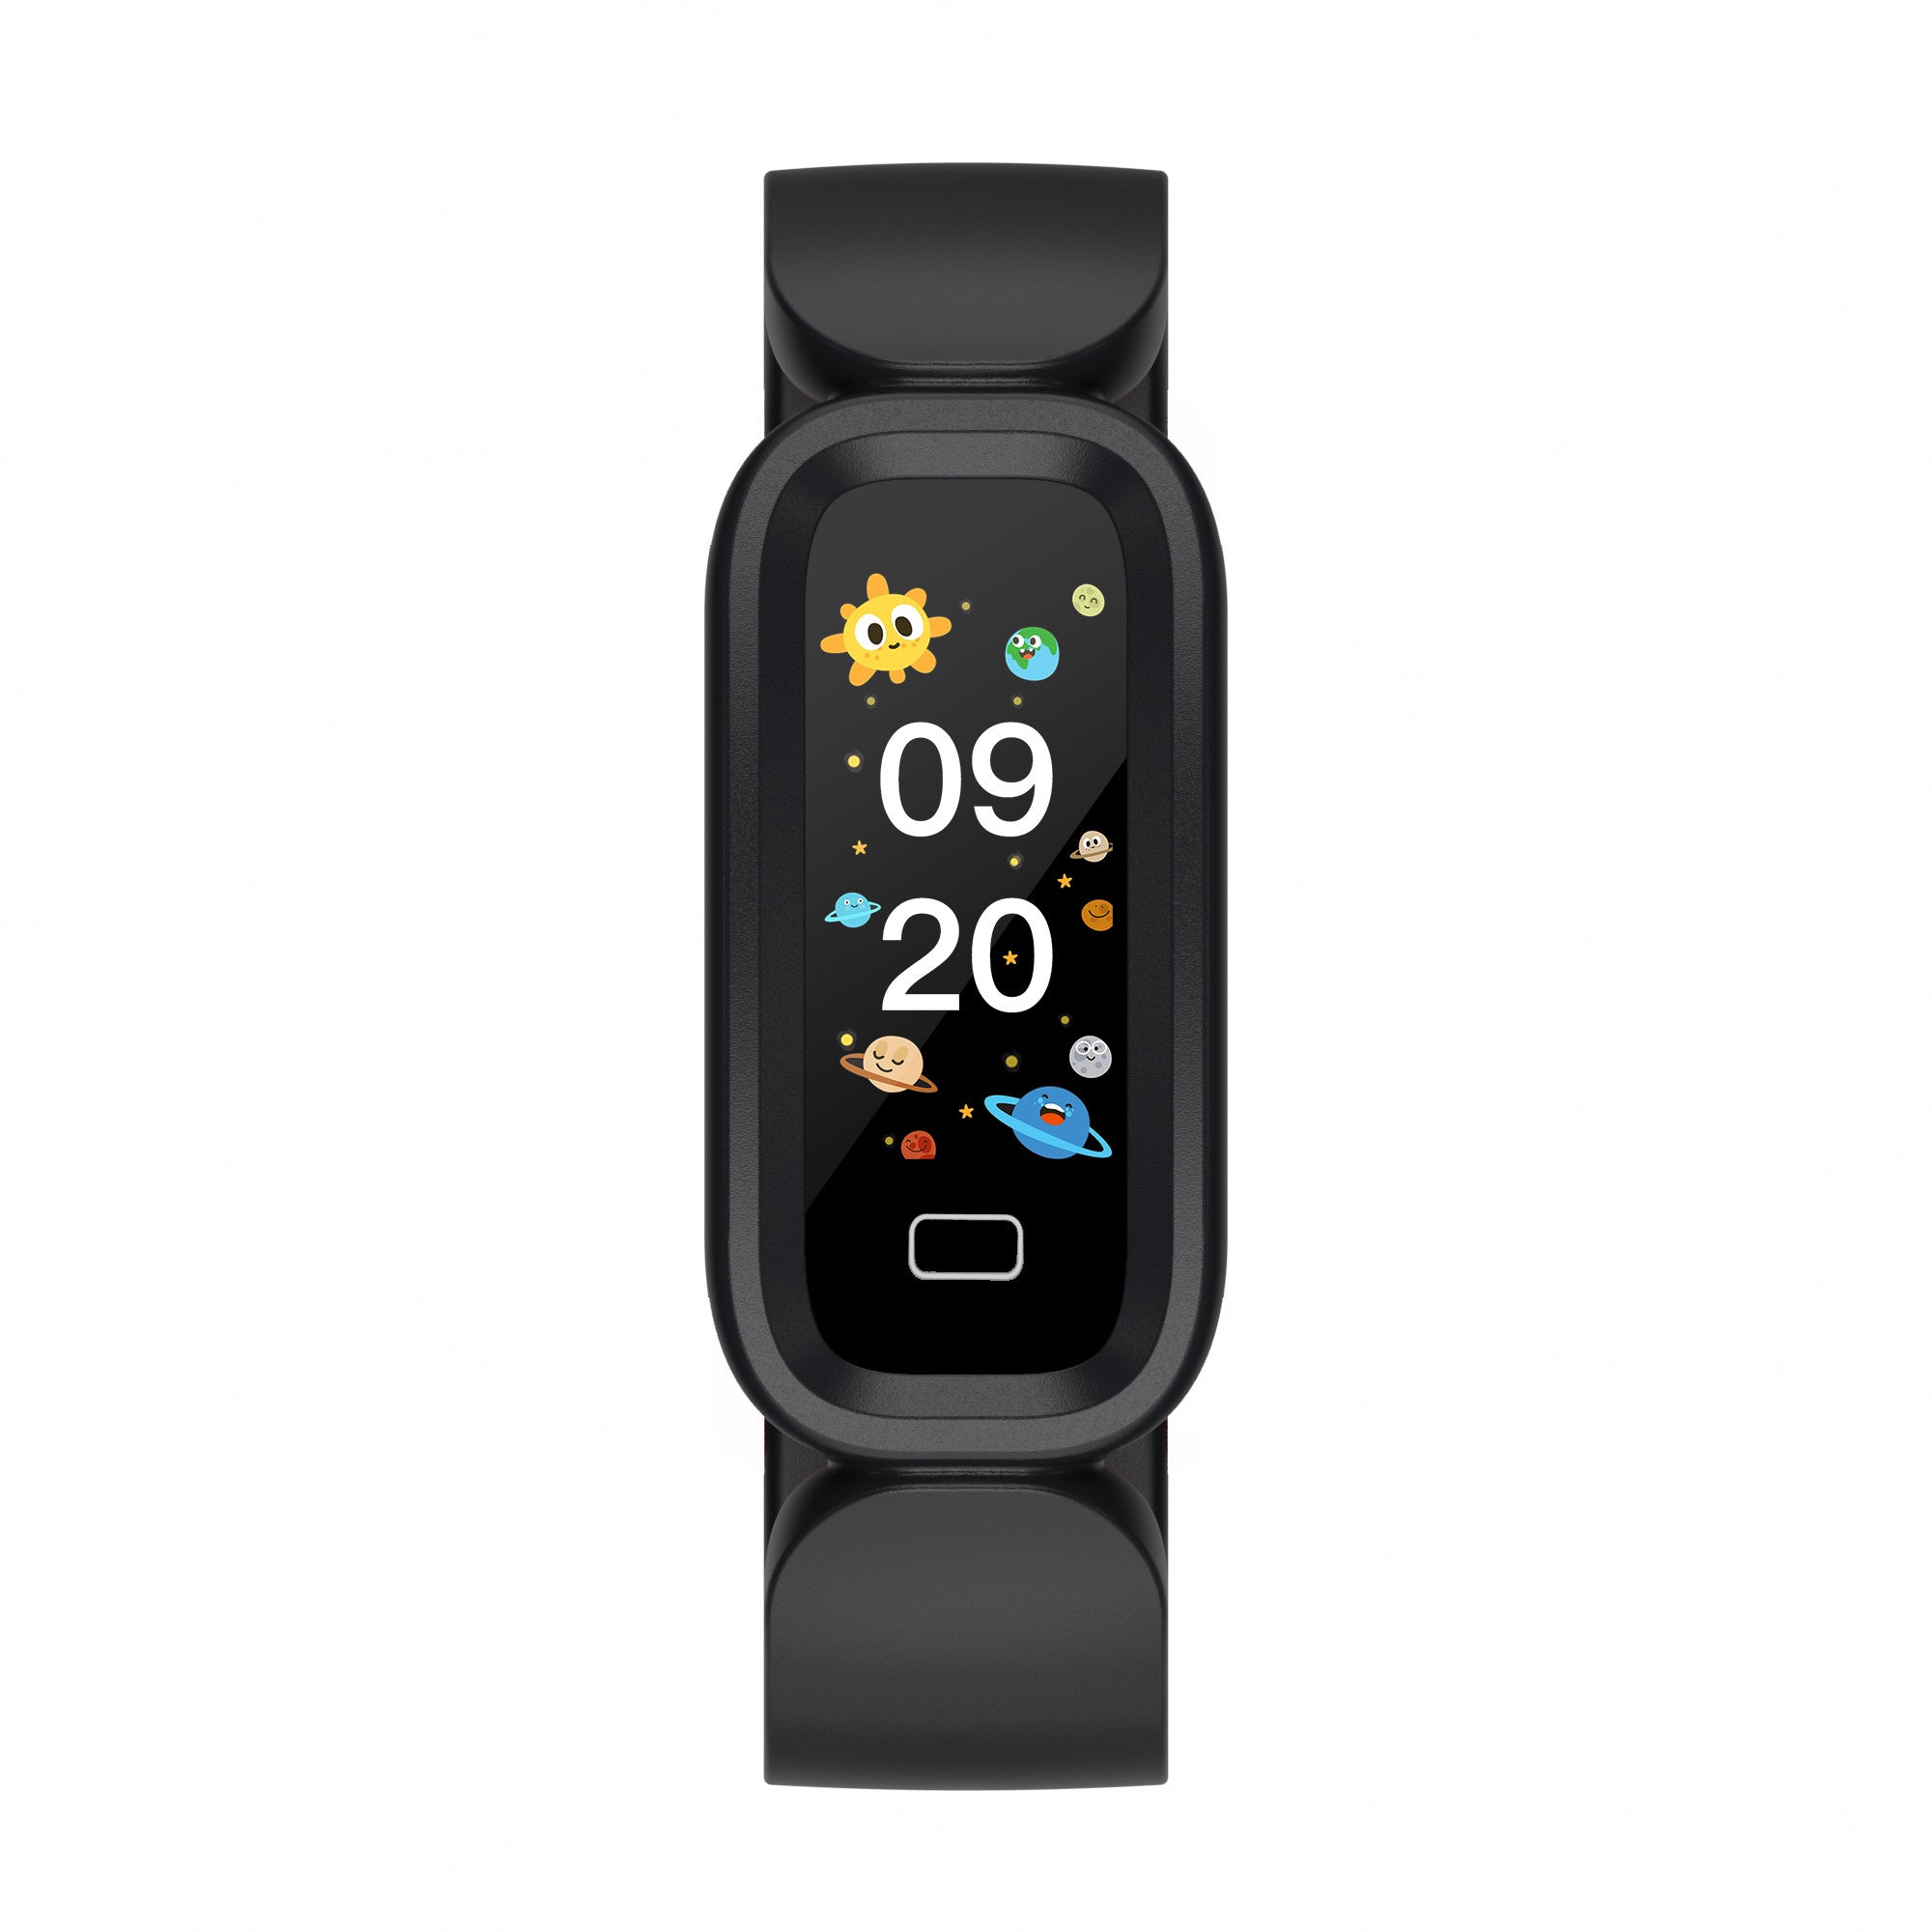 Amazon.com: TenCloud Band for Veryfit Smart Watch IDW19 Bands Lightweight  Silicone Wristband Compatible with MILOUZ, Amzhero, A-TGTGA, TOOBUR, TMHAI,  KALINCO IDW19 Smart Watch (Black) : Cell Phones & Accessories